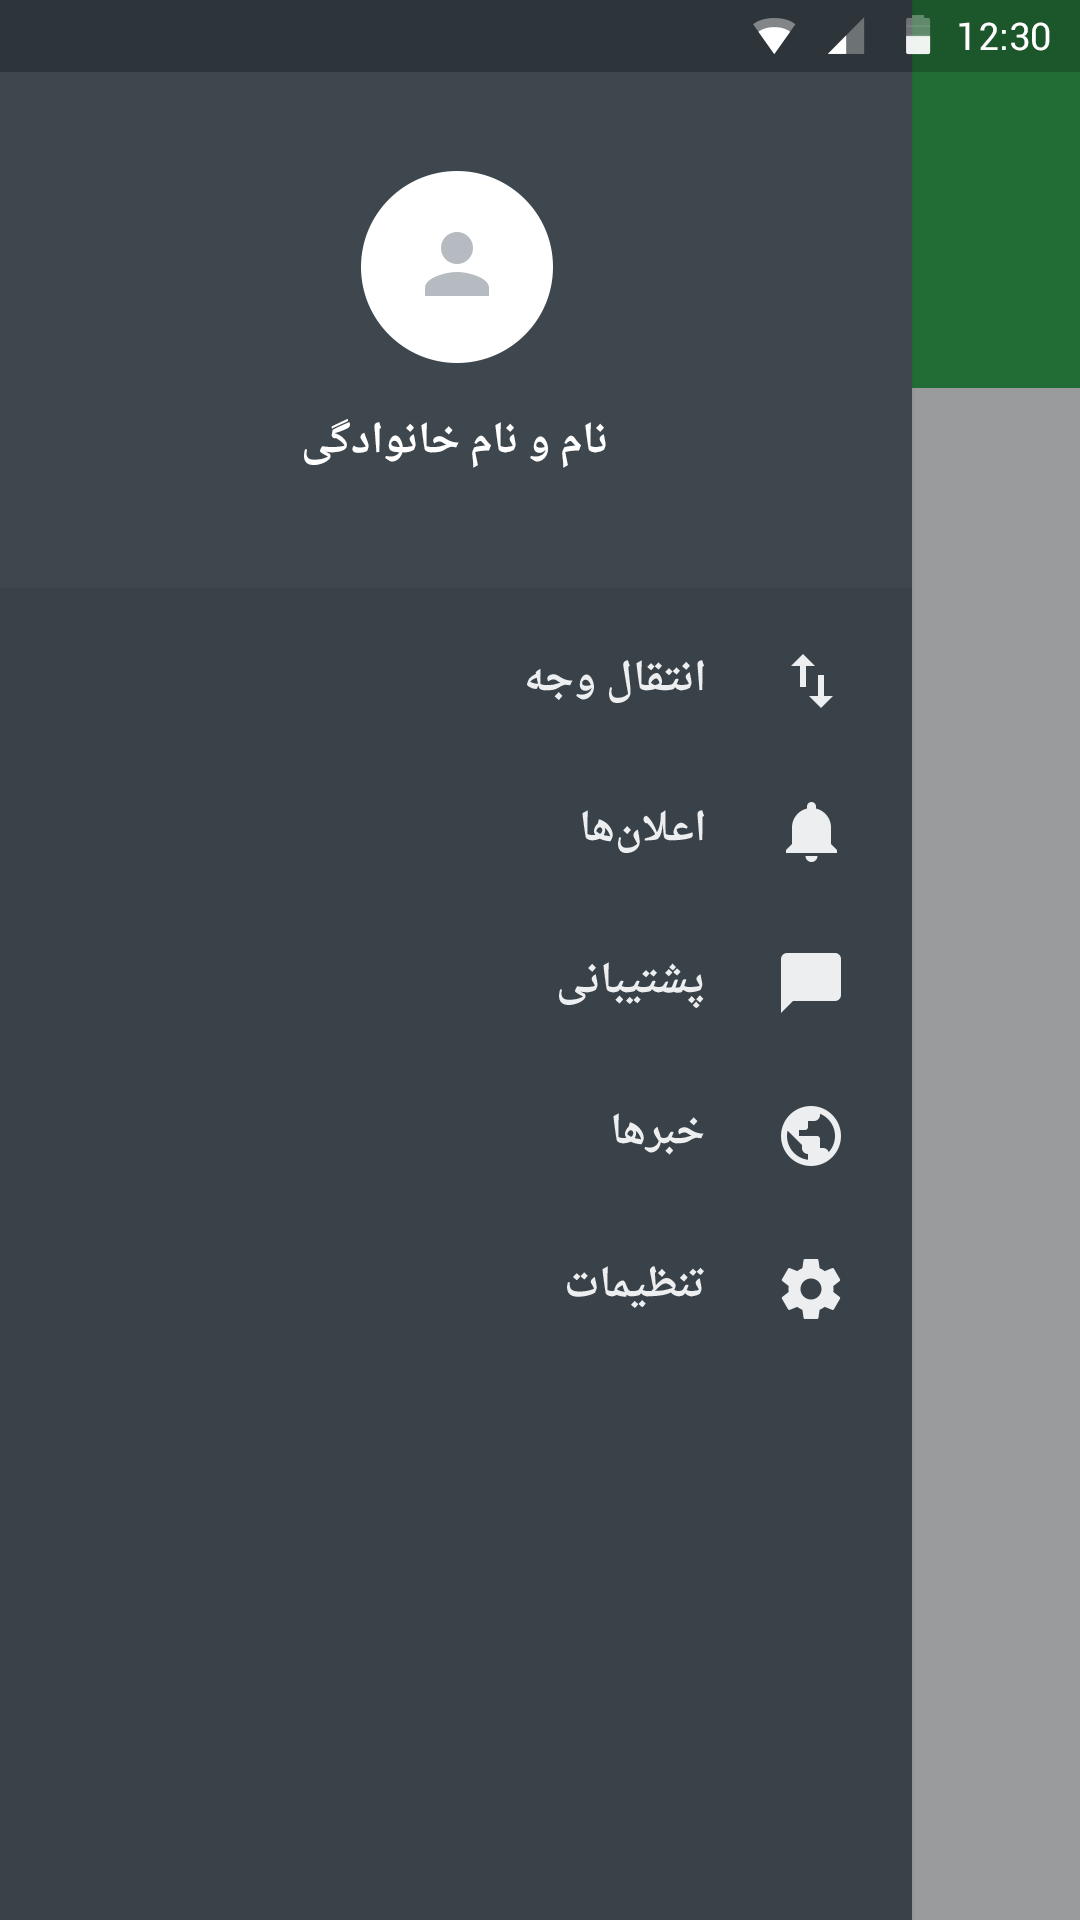 Upal for Android by Pouya Saadeghi - /projects/S562IPTNJJiBAwITrFqDig6b46ZJ4R5c.png